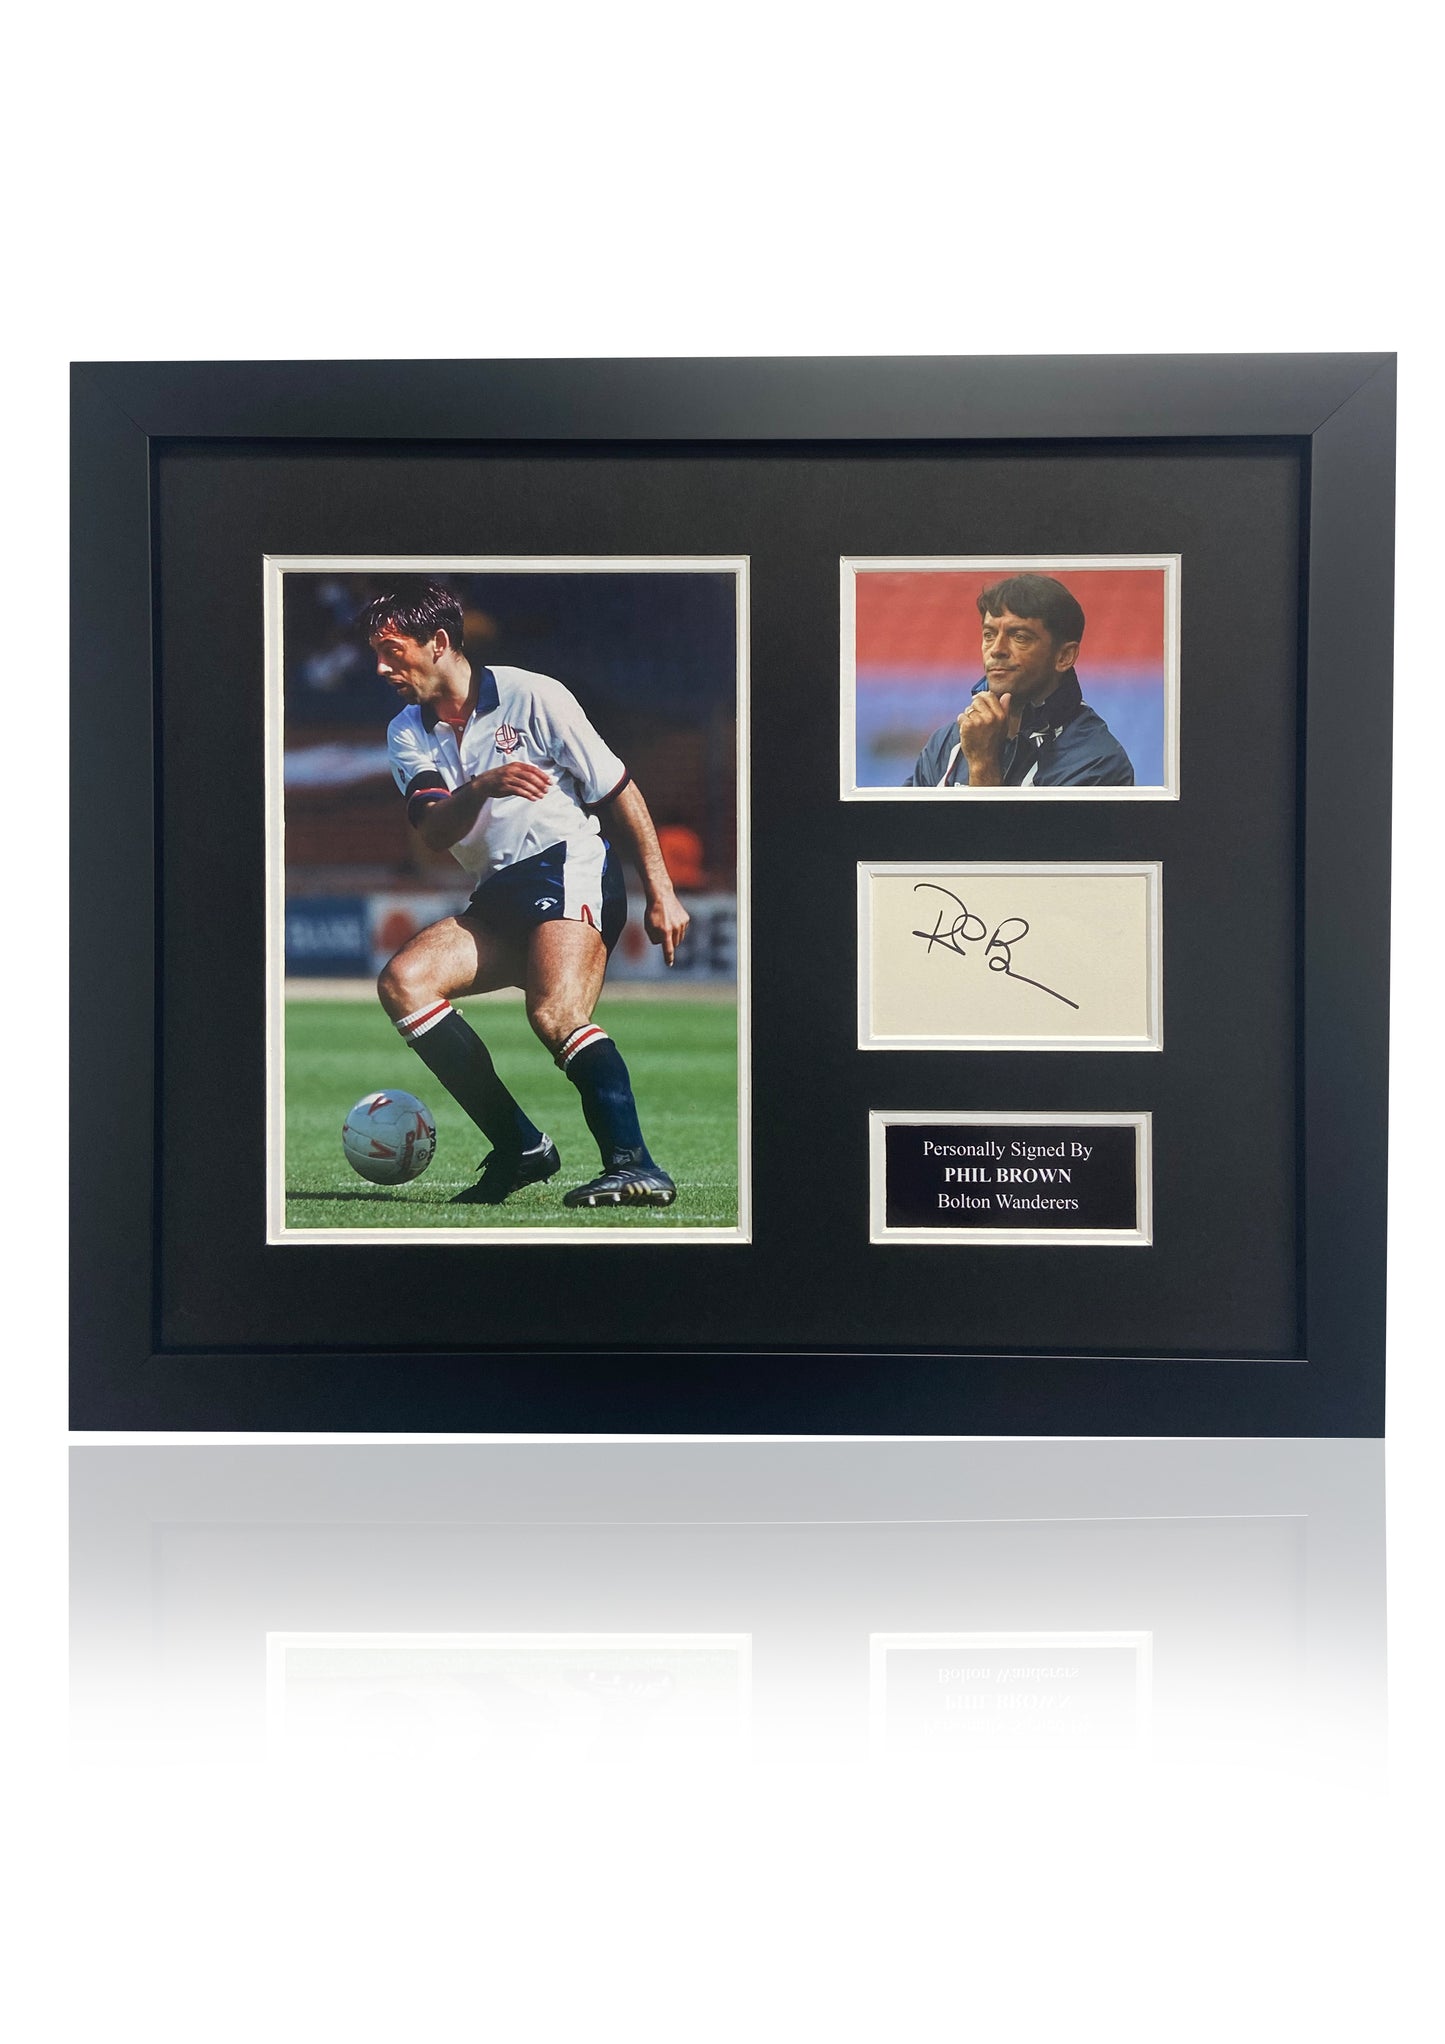 Phil Brown Bolton Wanderers signed framed photo montage